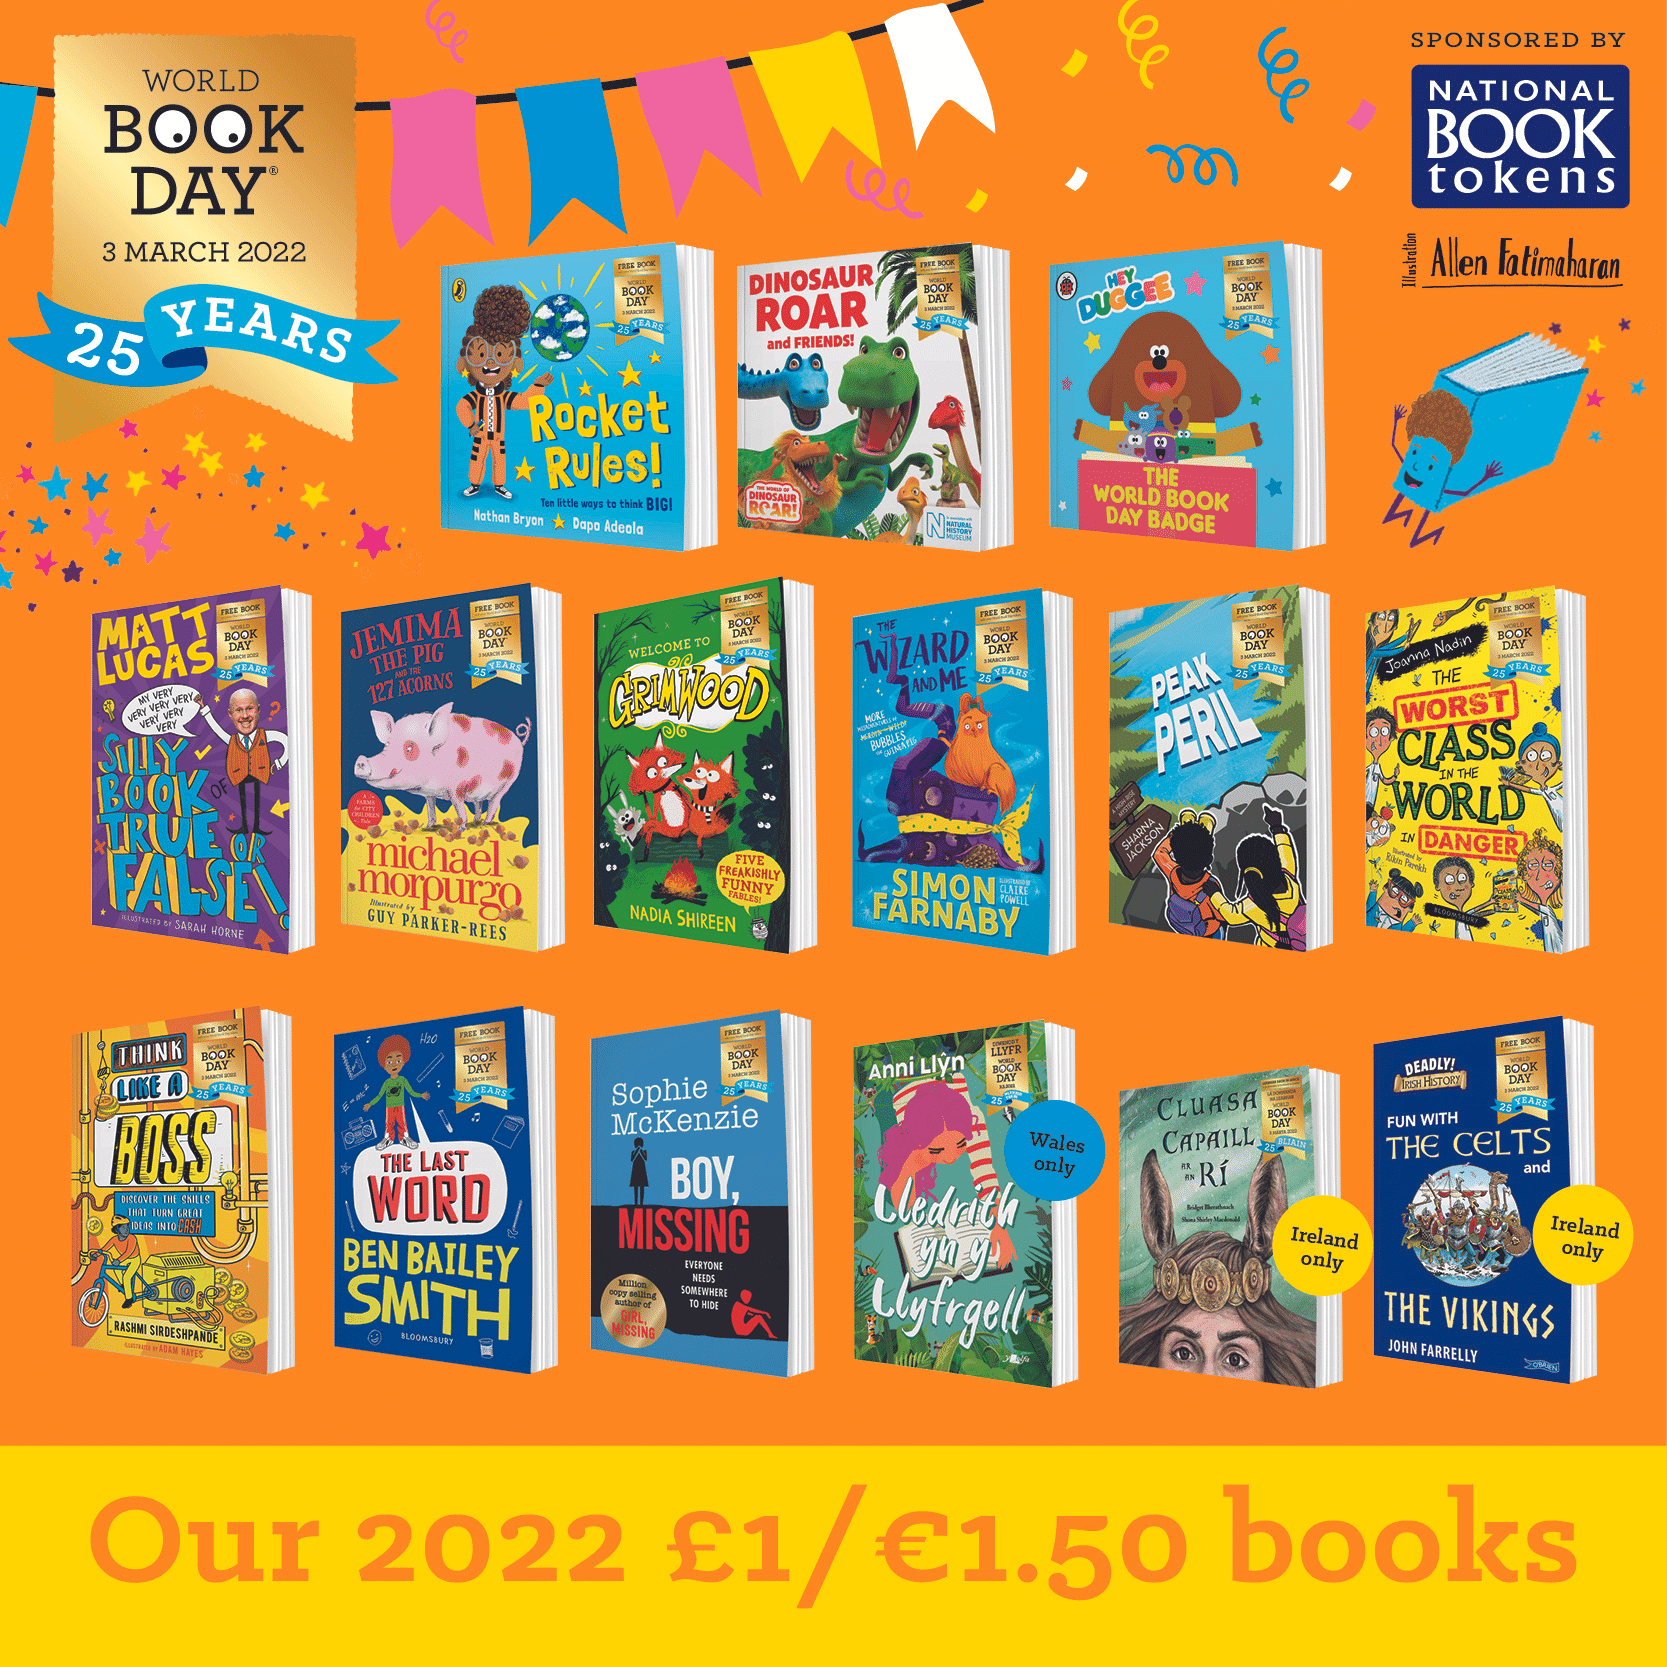 Our 2022 £1 books